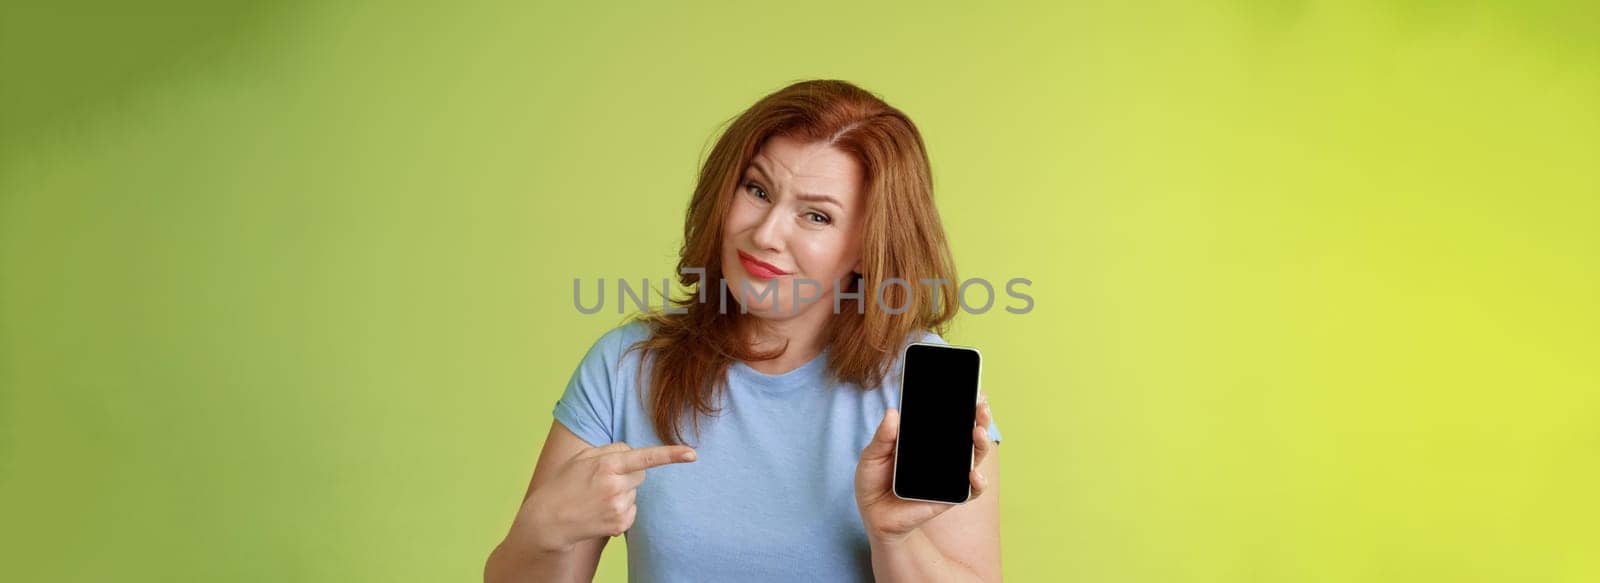 Seriously it awful. Displeased disappointed redhead mature female tilt head cringe grimacing reluctant pointing smartphone blank display index finger showing bad photograph share negative opinion.